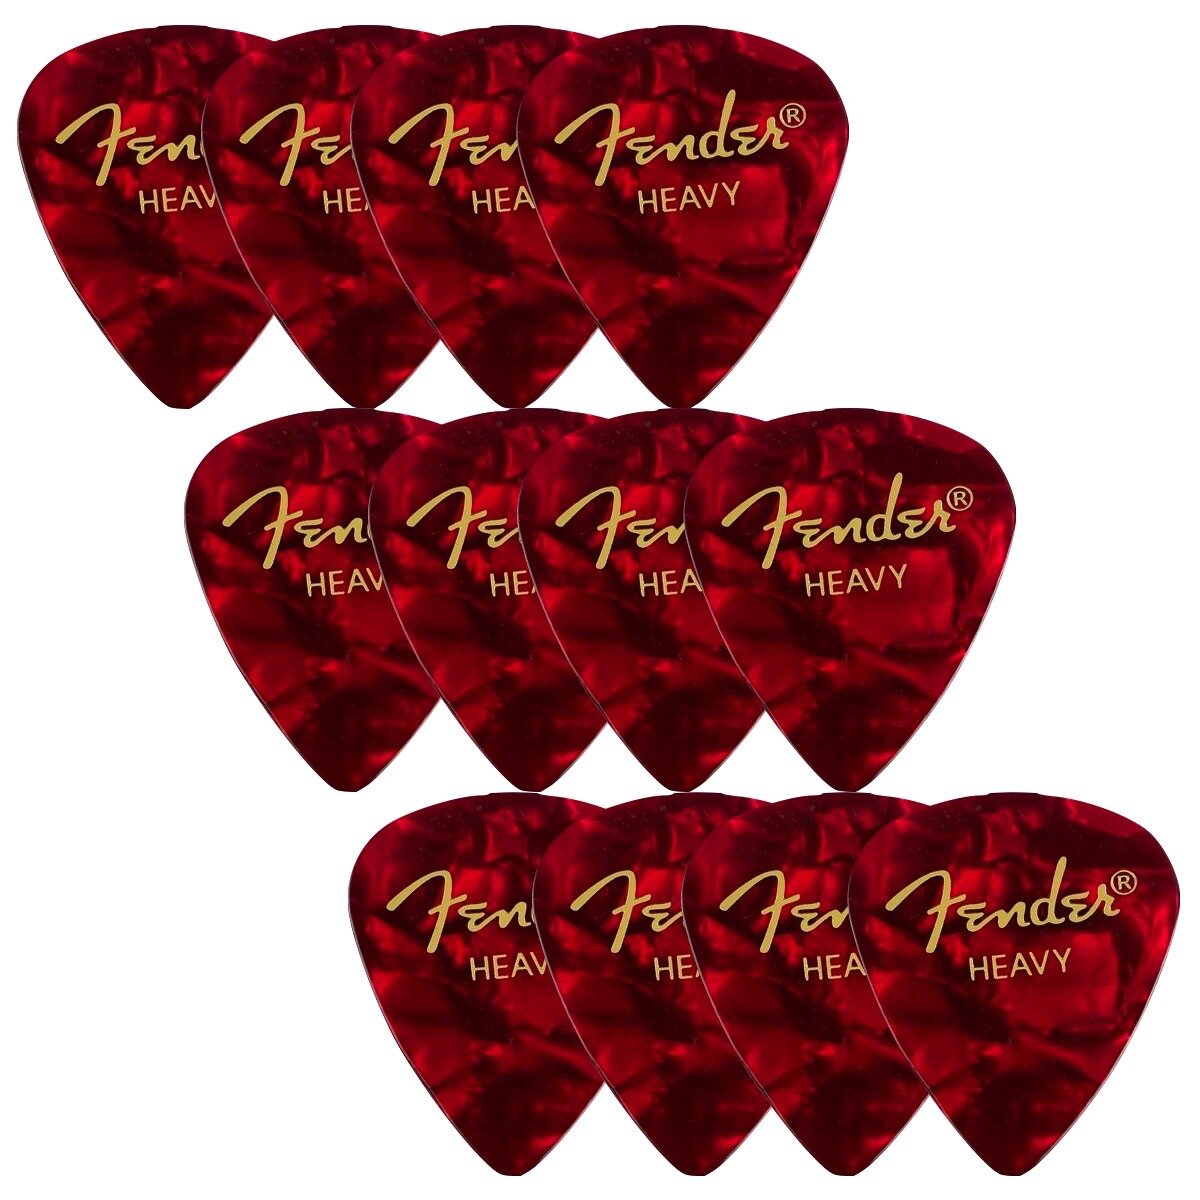 Fender Classic Celluloid Pick 12 Pk Red Moto Heavy -  1980351909